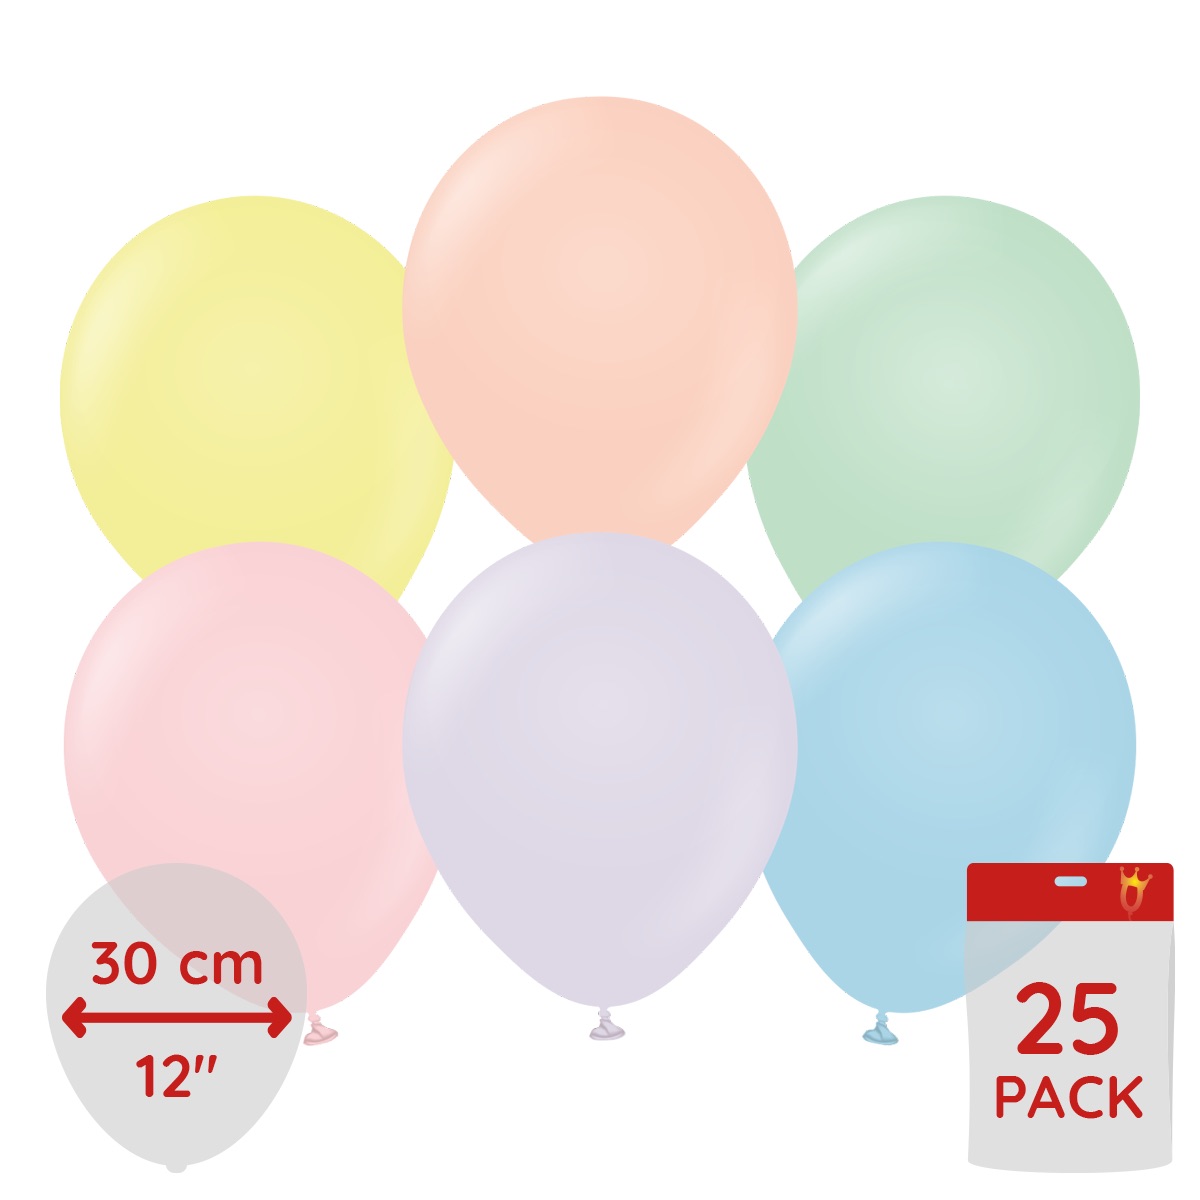 Latexballoons - Assorted Macaron Colors 30 cm 25-pack